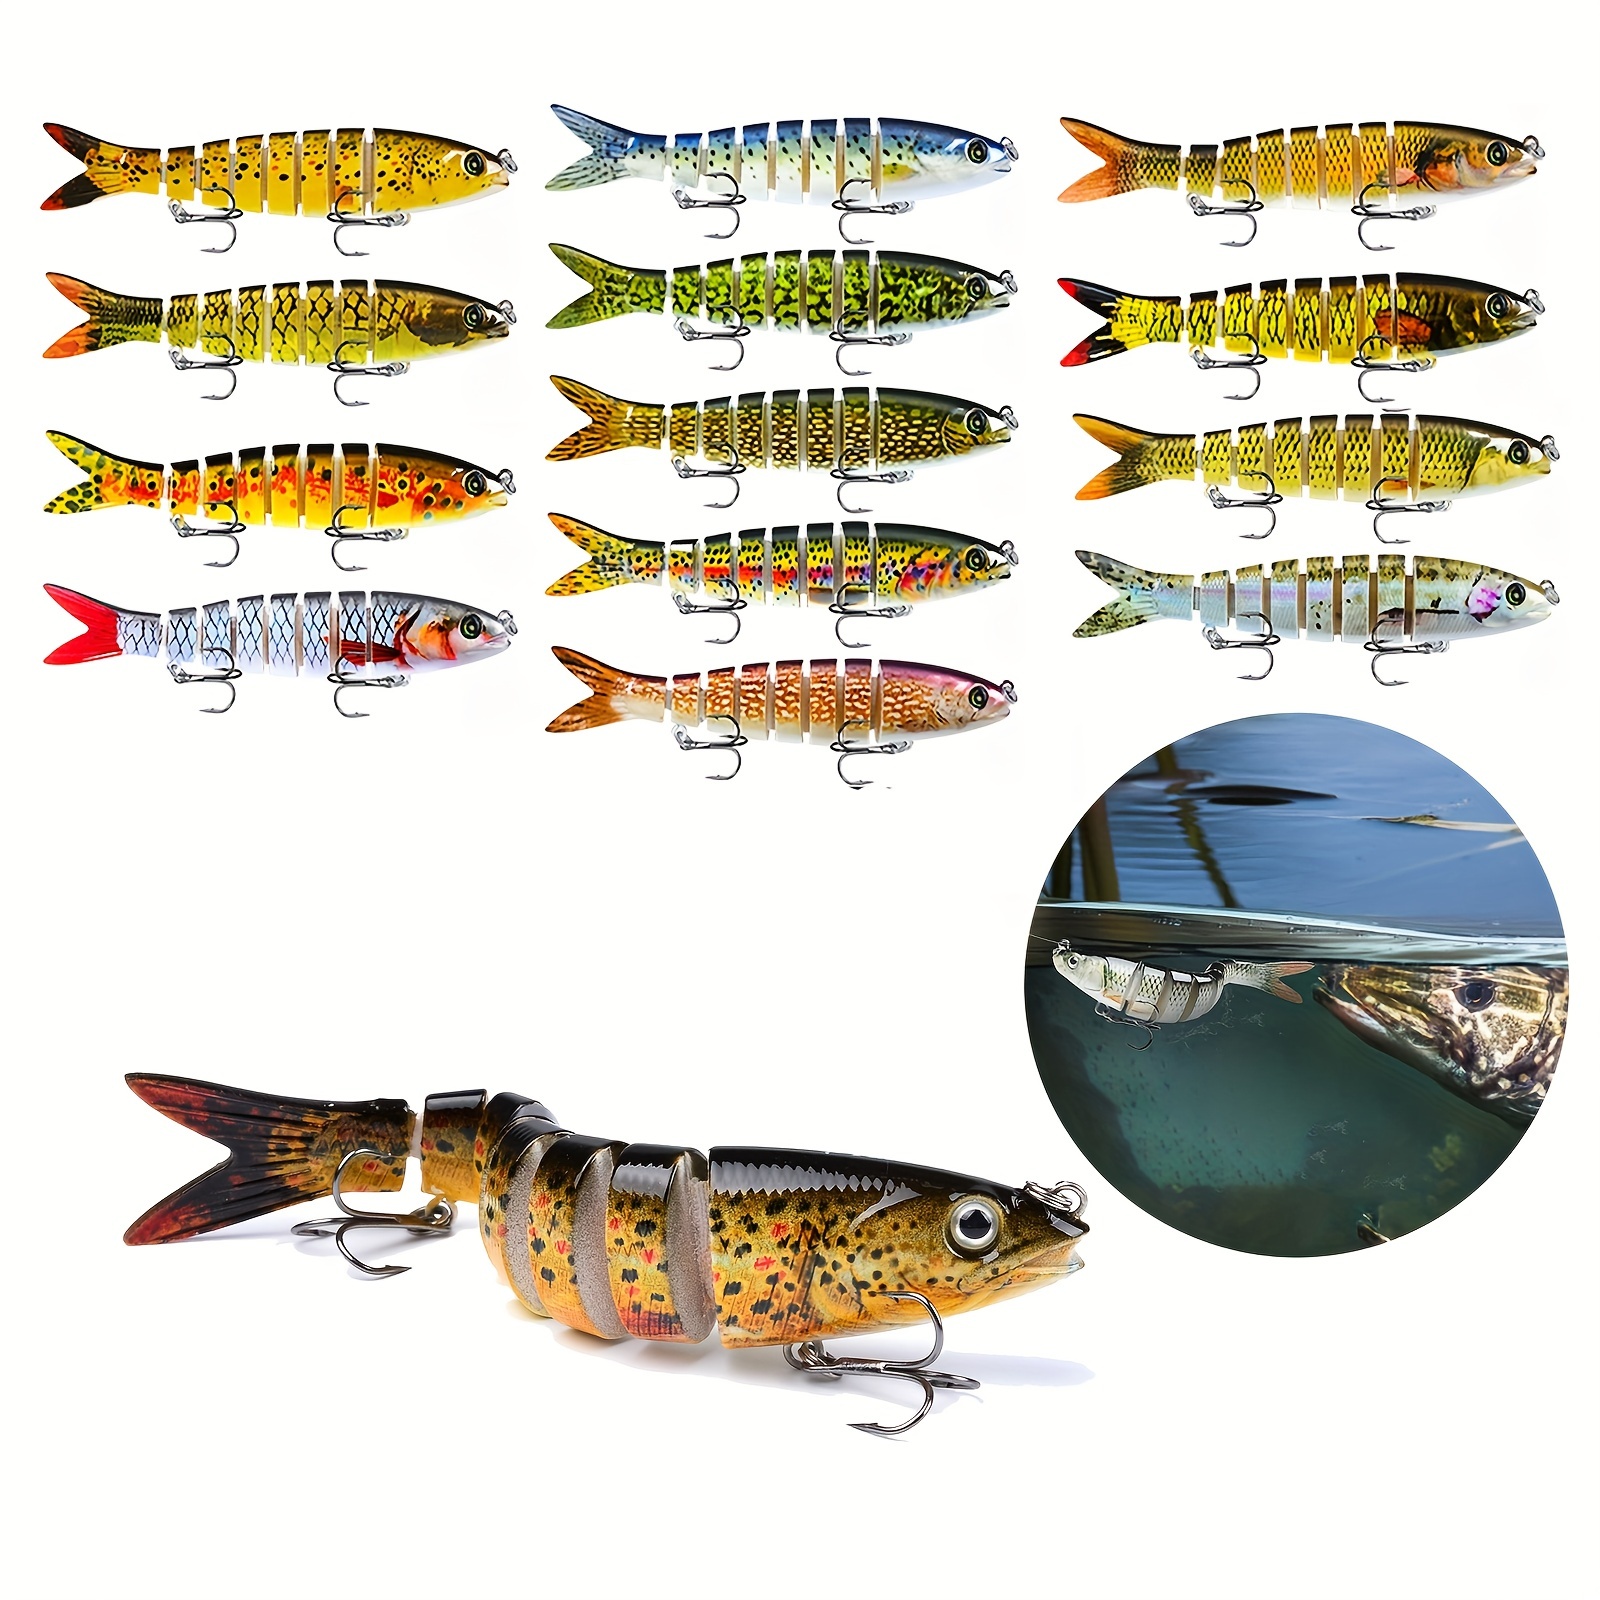 Fishing Lures for Walleye(Pickerel),B,Trout,Multi Jointed SWIMBAIT. 